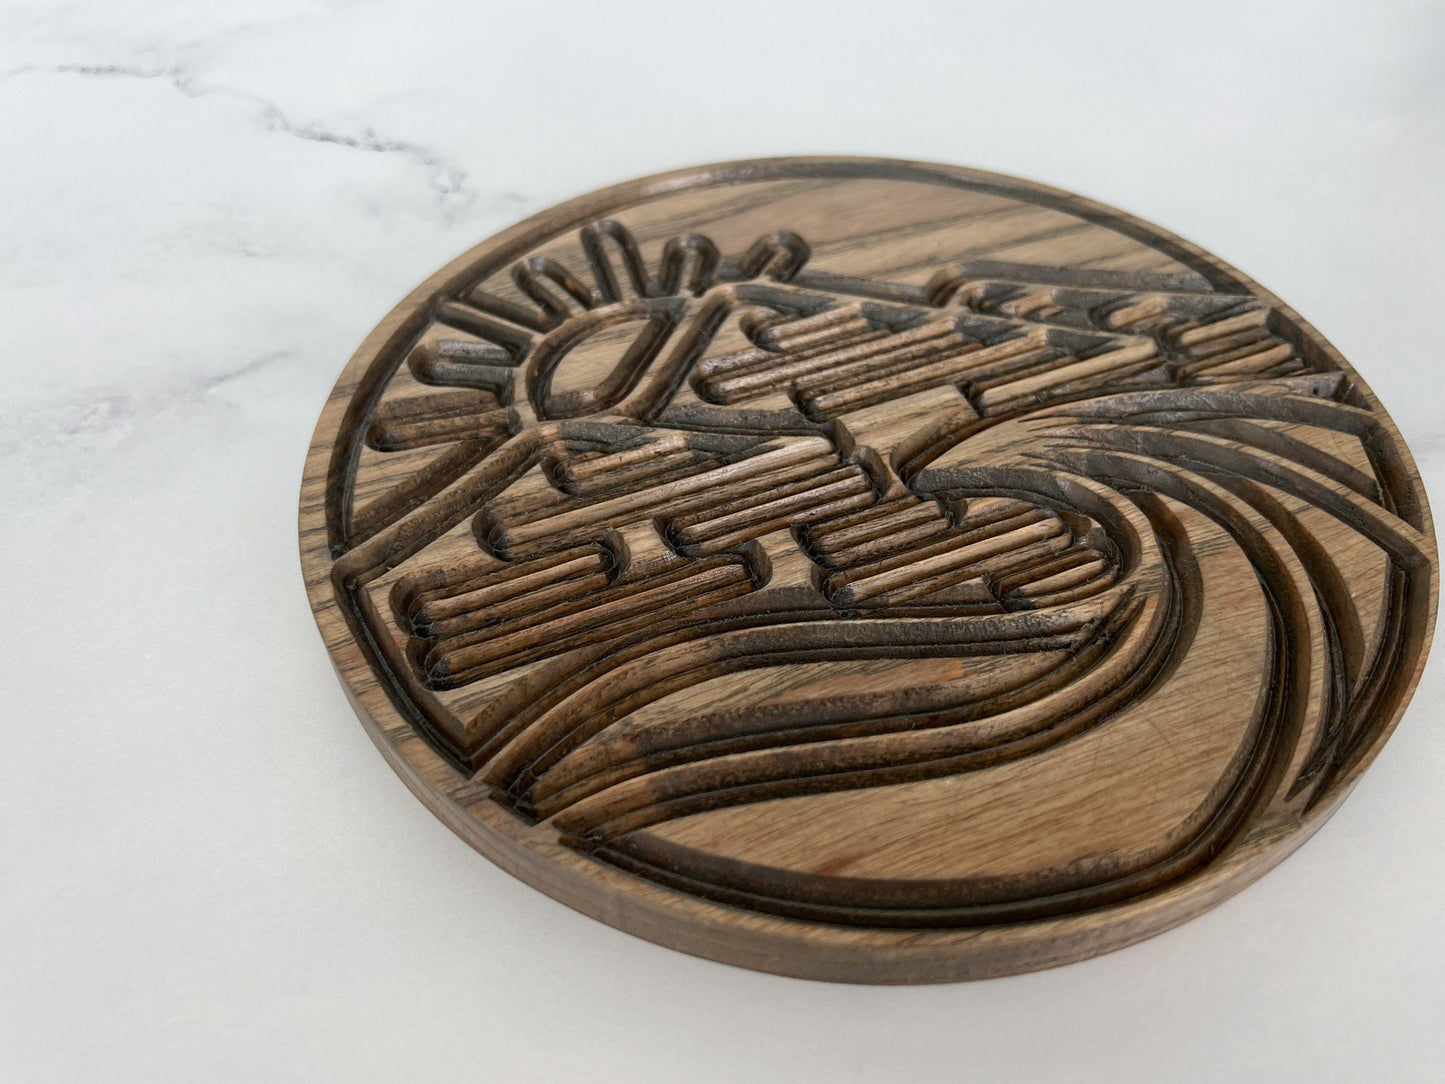 Round Trivet with Mountains & Ocean Waves, Serving Tray, Wood Trivet for Dining Table, Dining Accessories, Wood Gifts, Hot Tray, Pot Holder